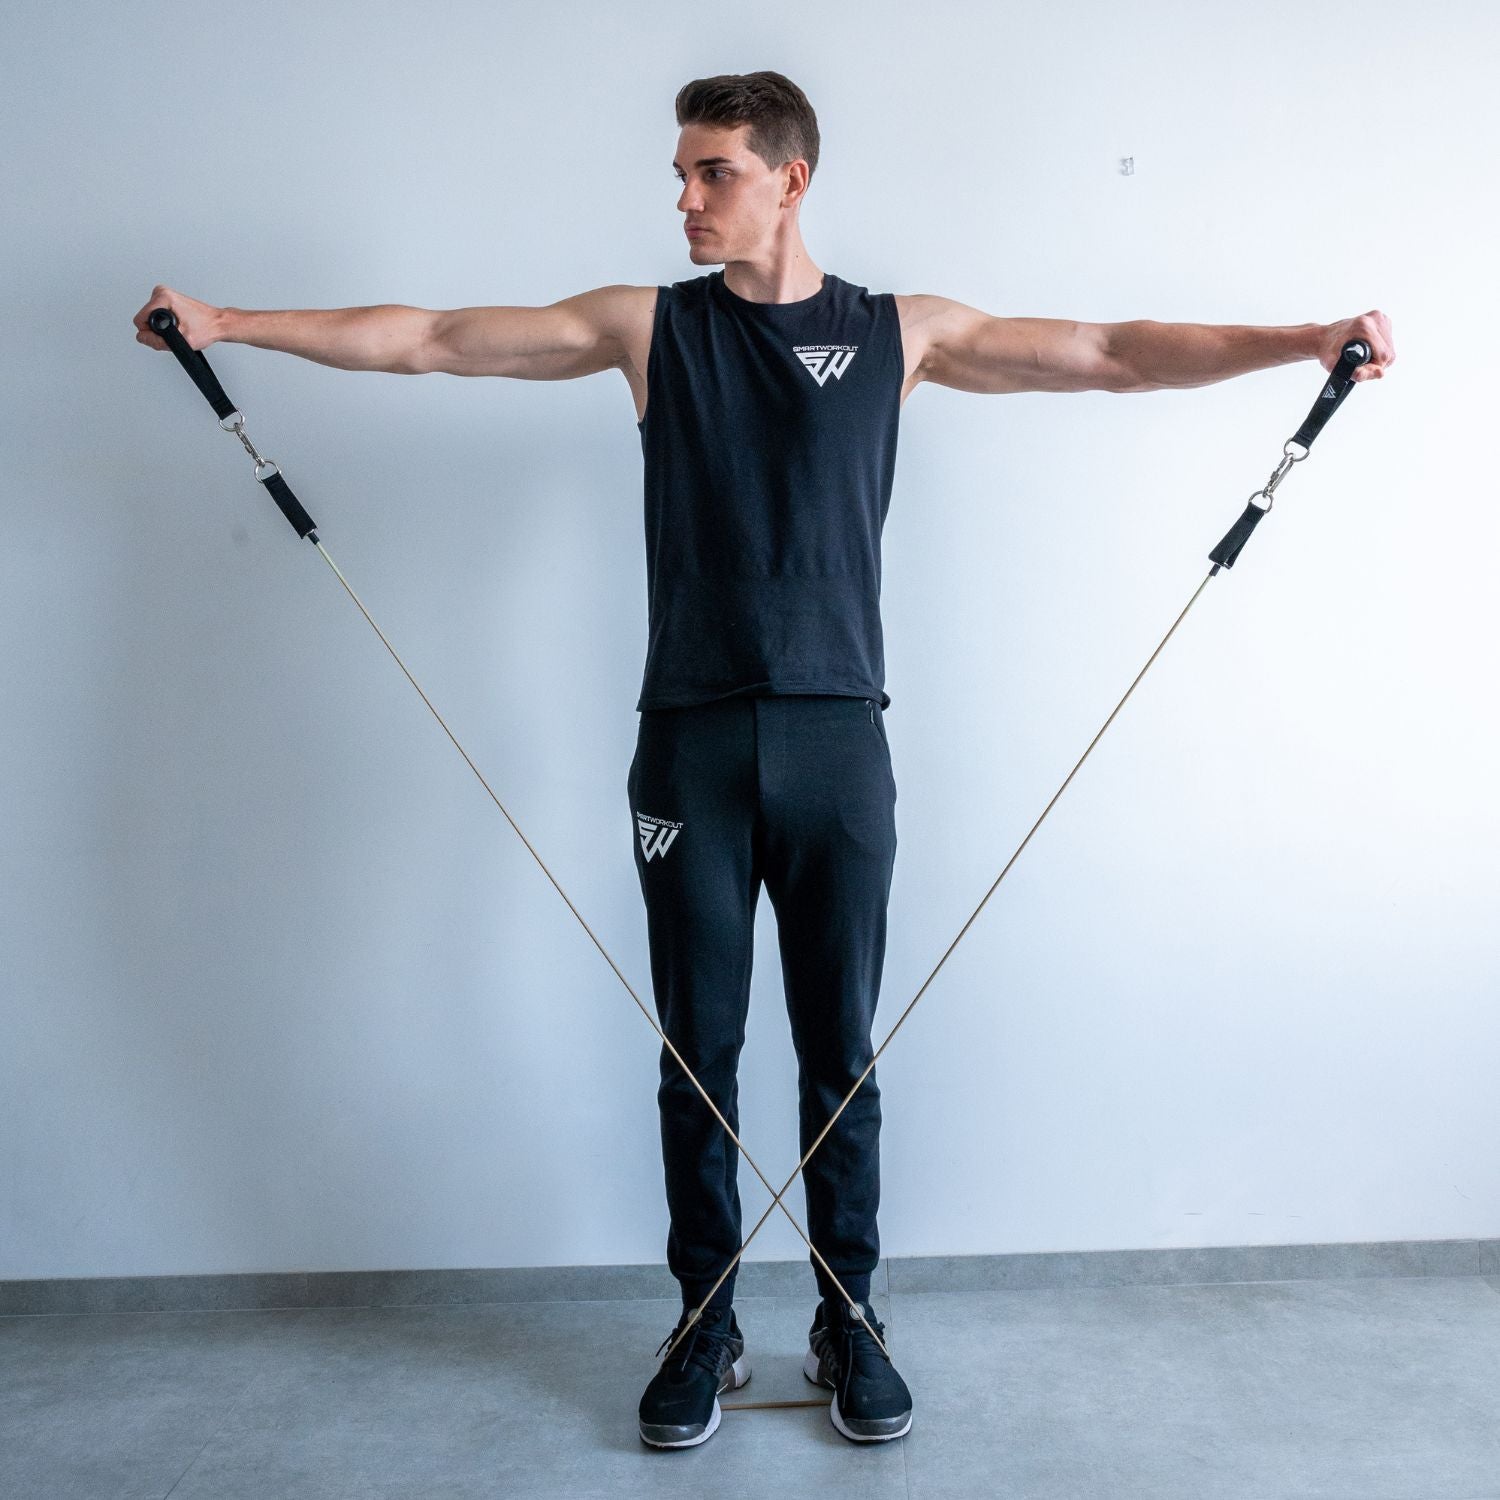 Exercises for Resistance bands